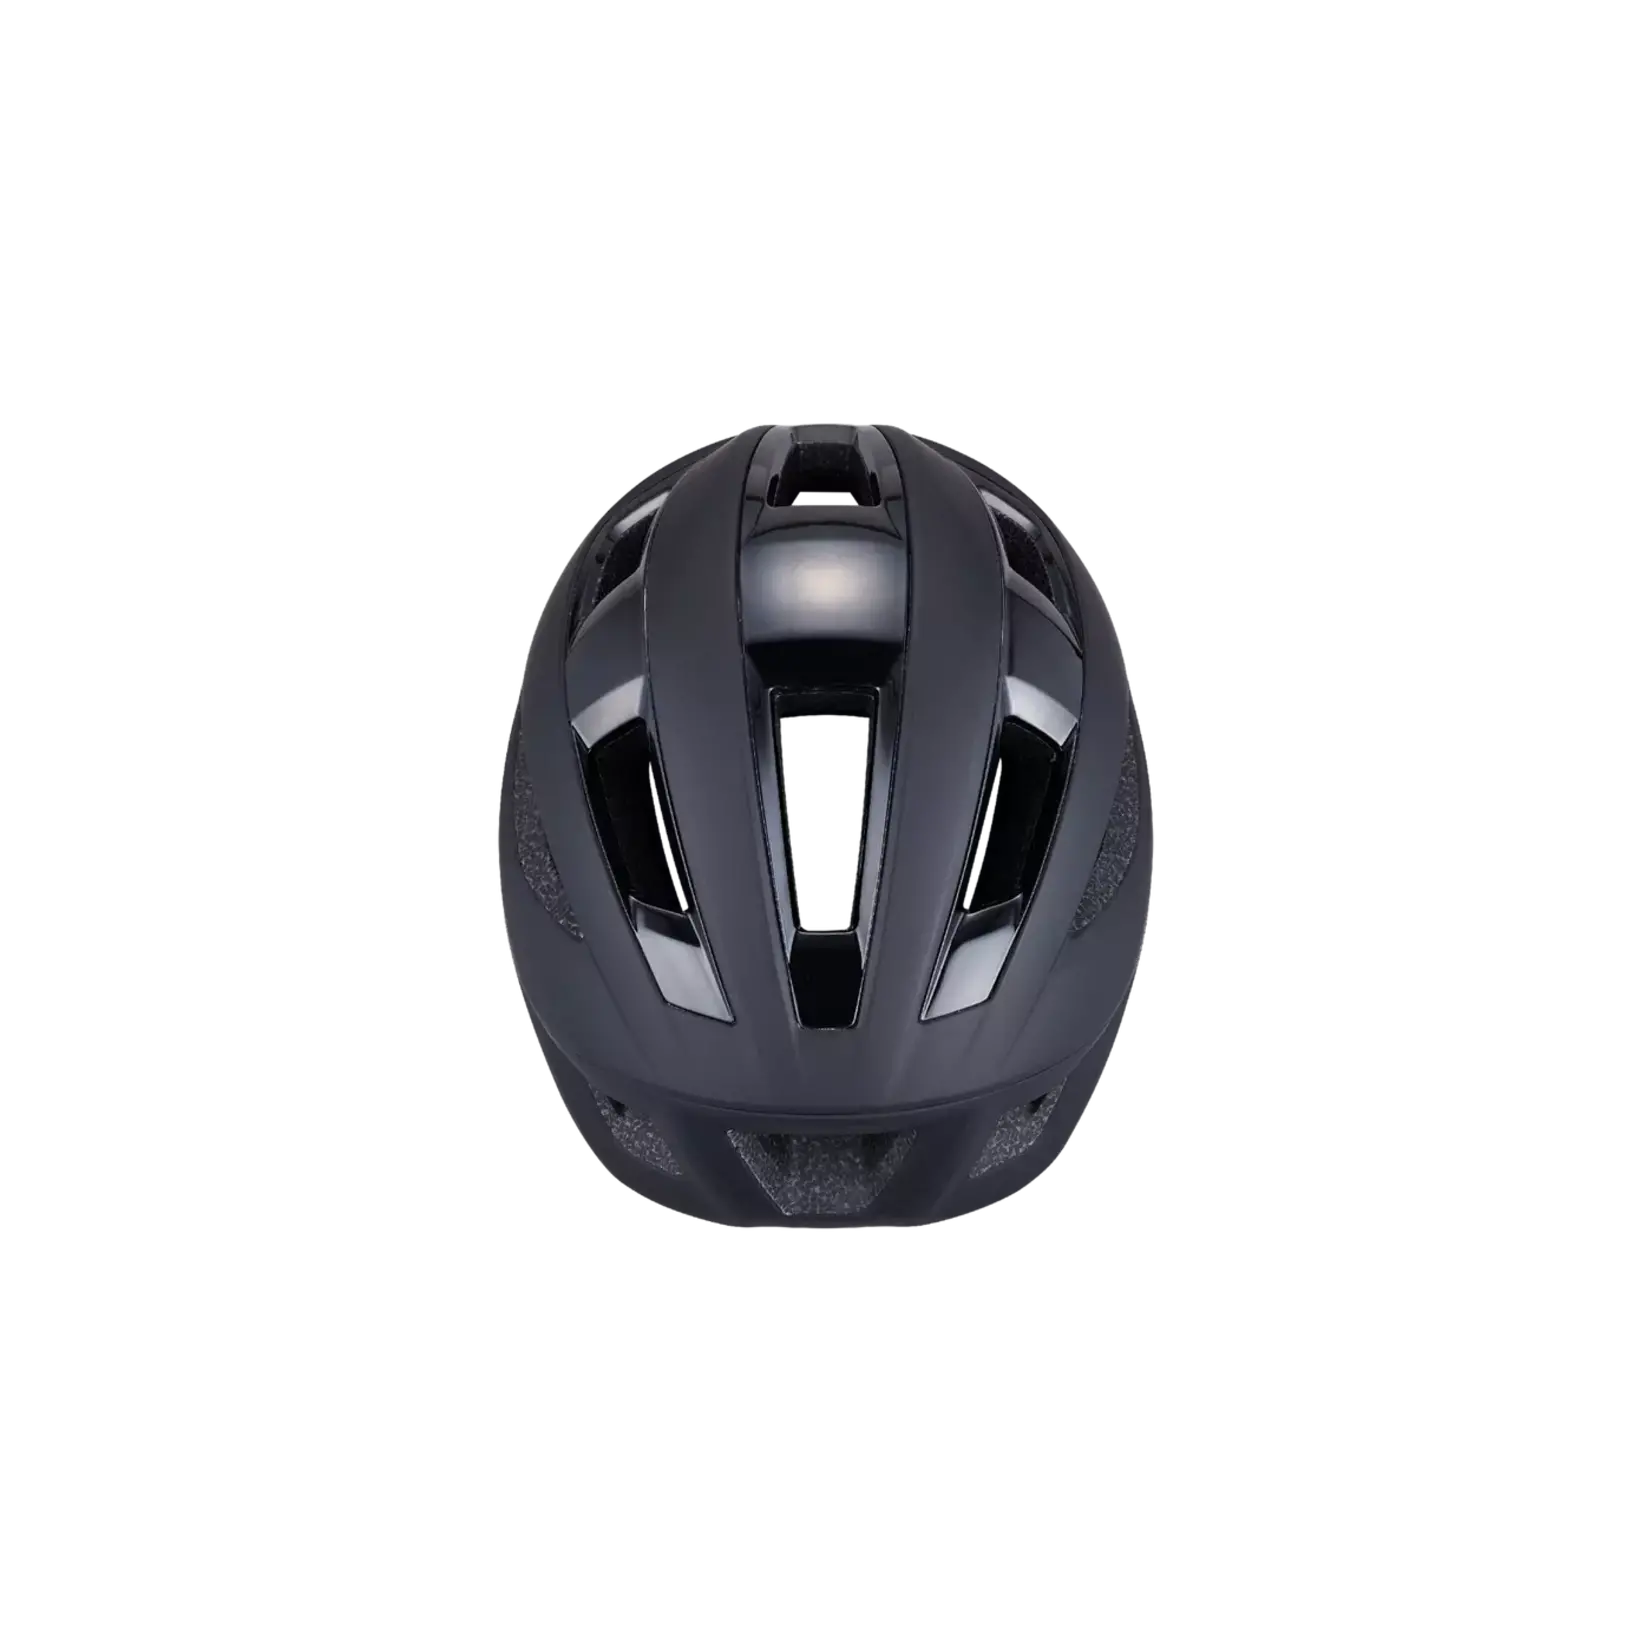 Specialized Specialized Search MIPS Helmet